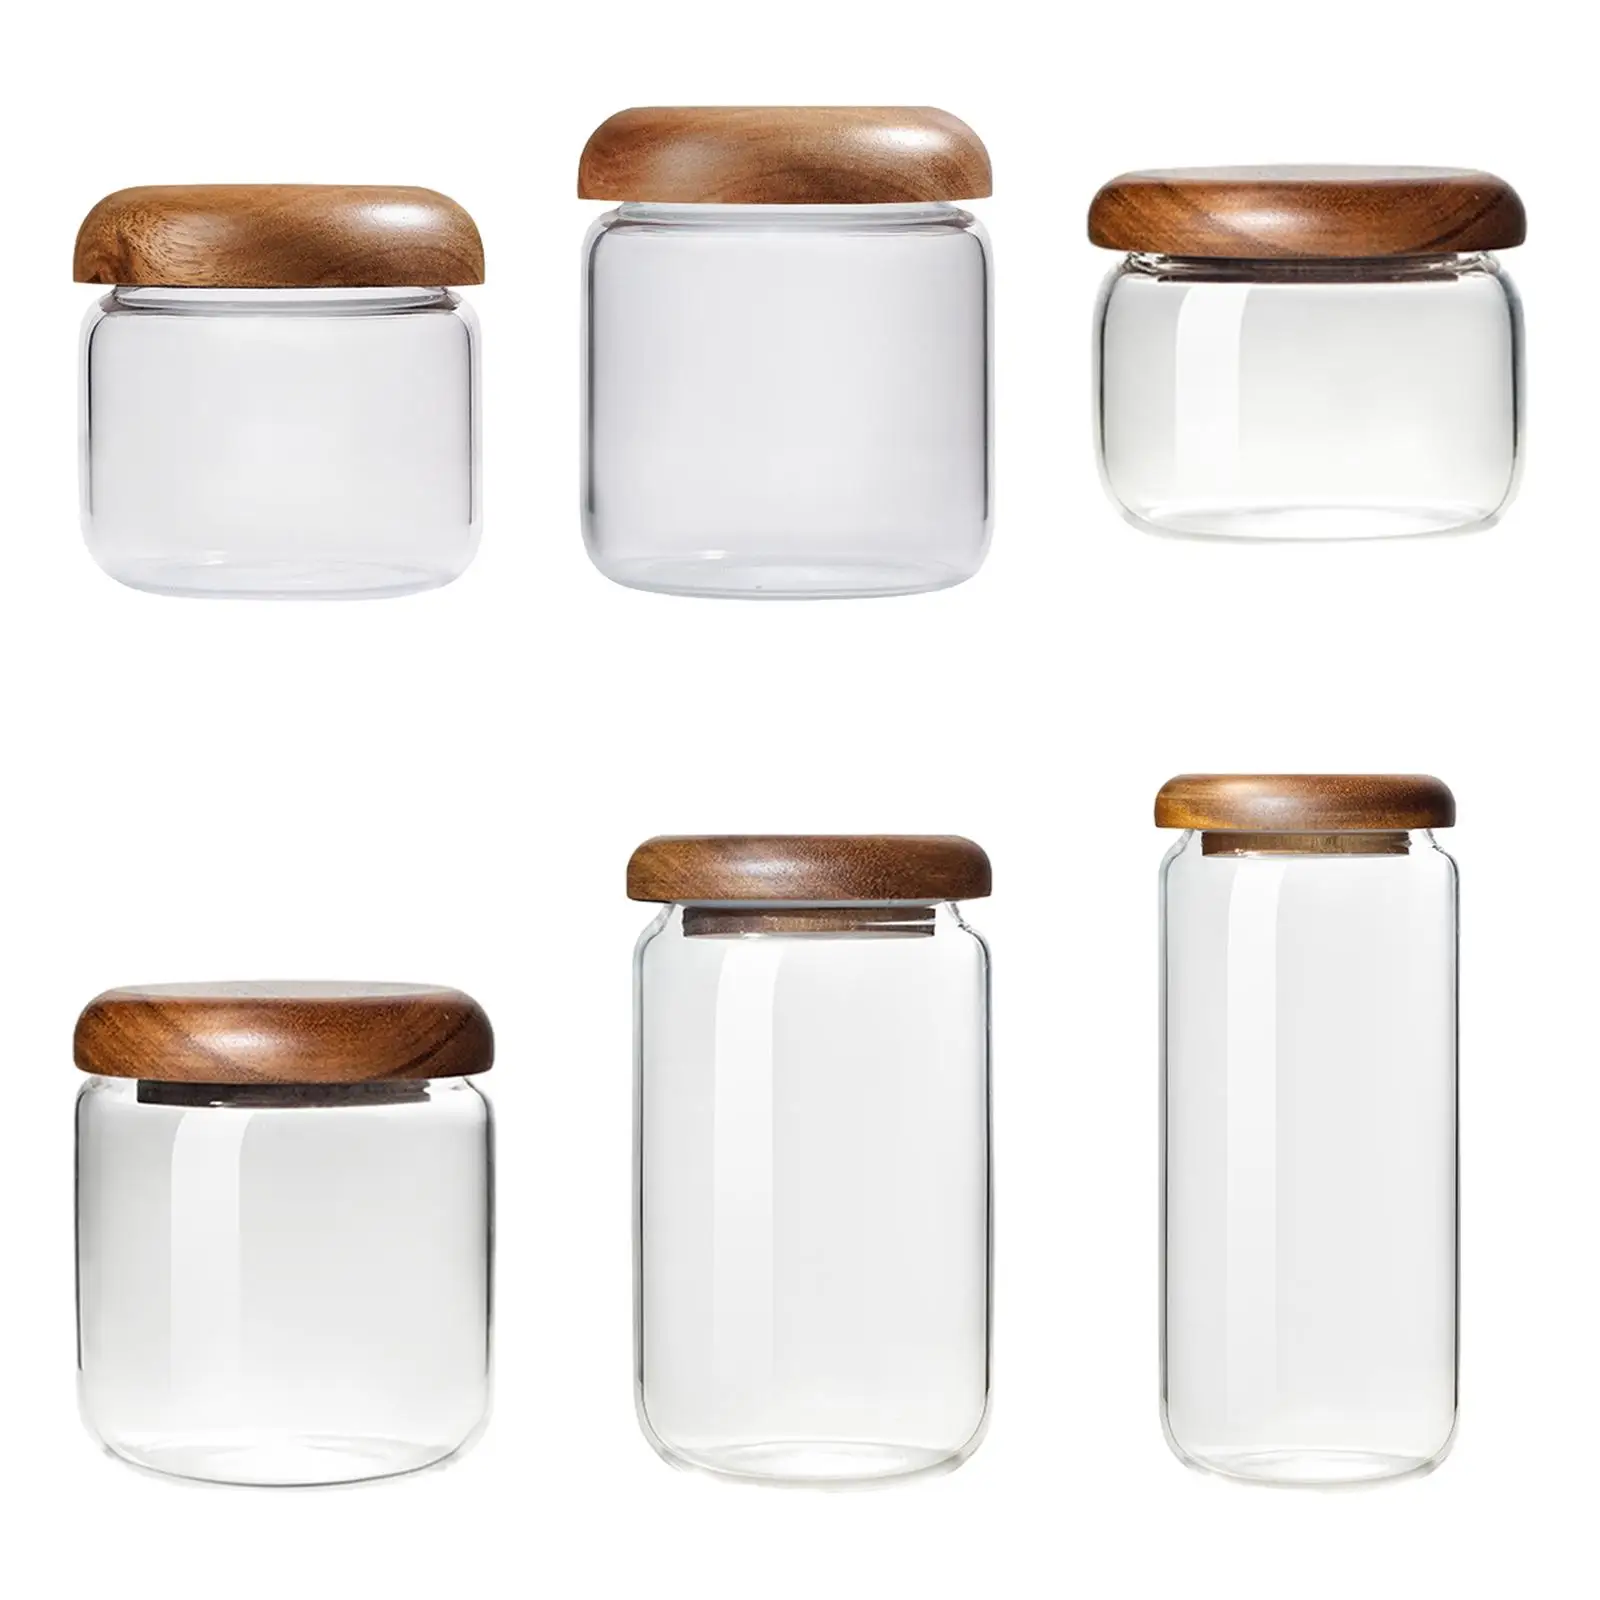 Glass Storage Jar with Airtight Lid Organizer Multipurpose Reusable Counter Top Spice Jar for Candy Dry Goods Flour Pasta Rice